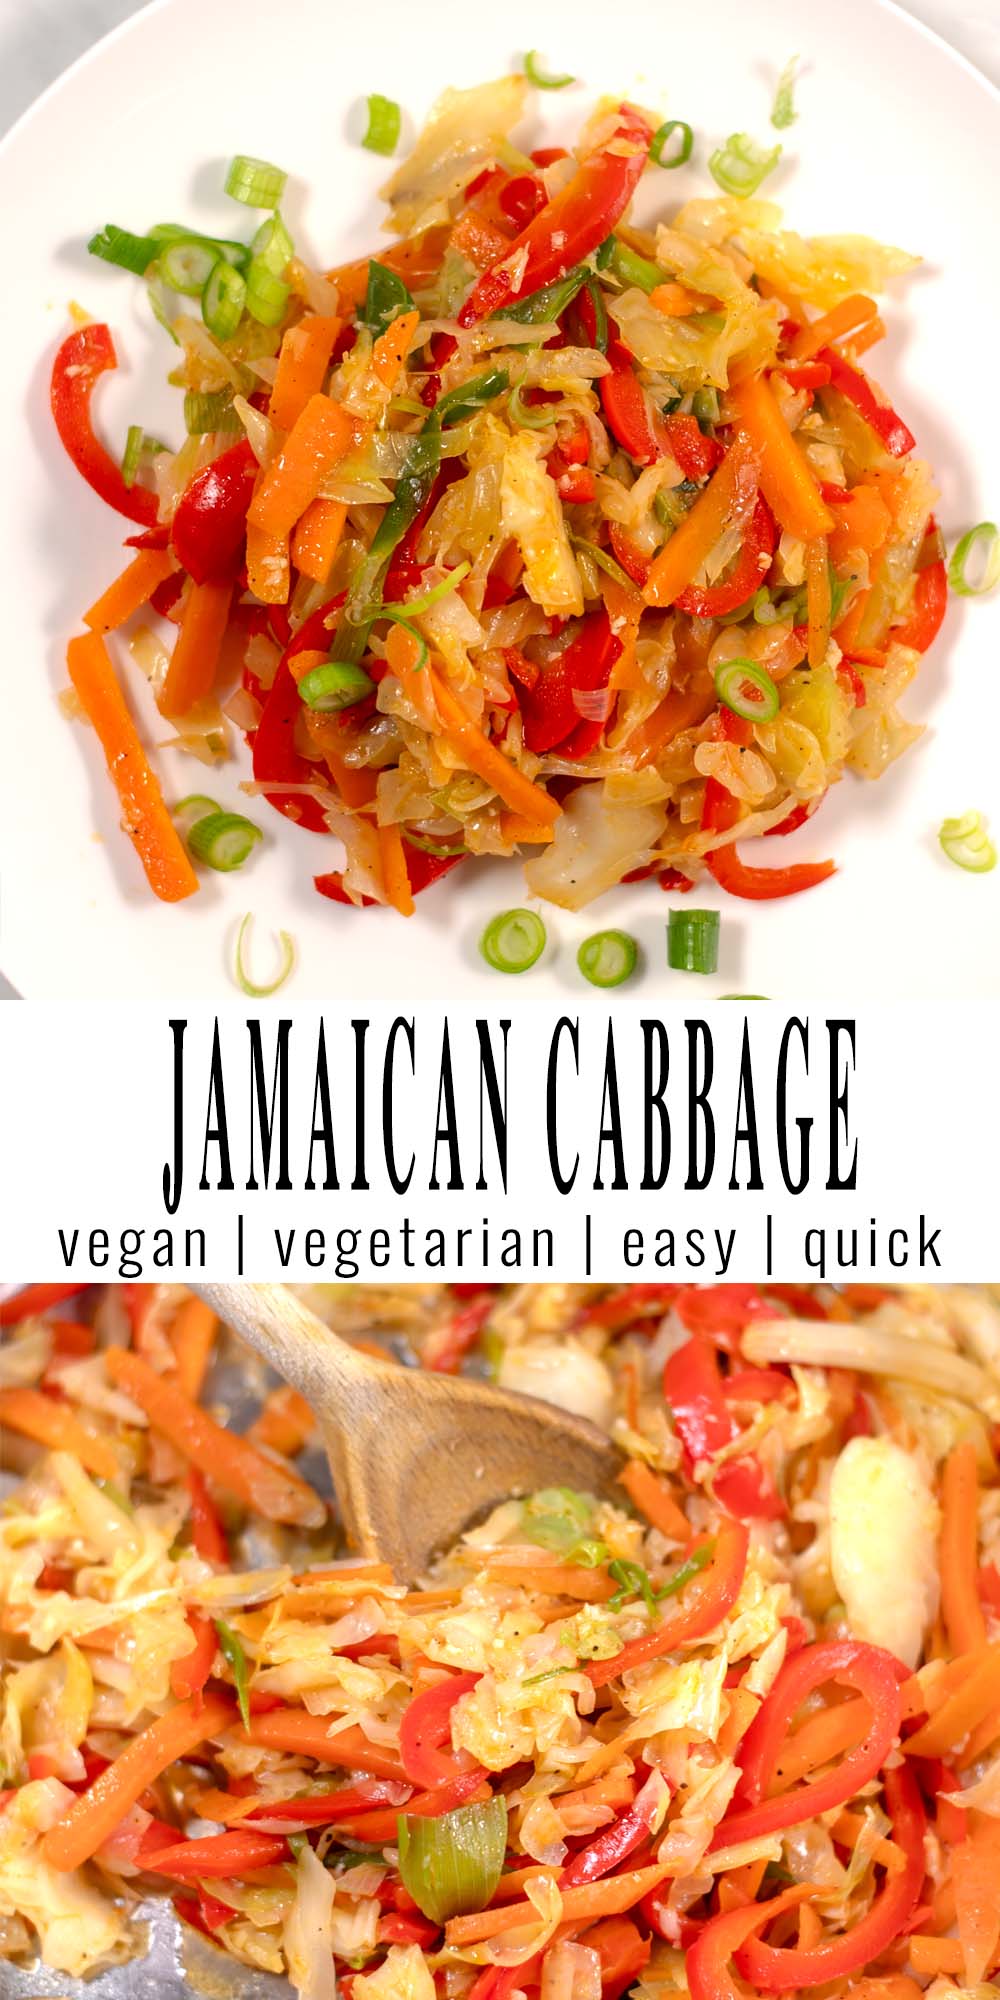 Collage of two photos showing Jamaican Cabbage with recipe title text.